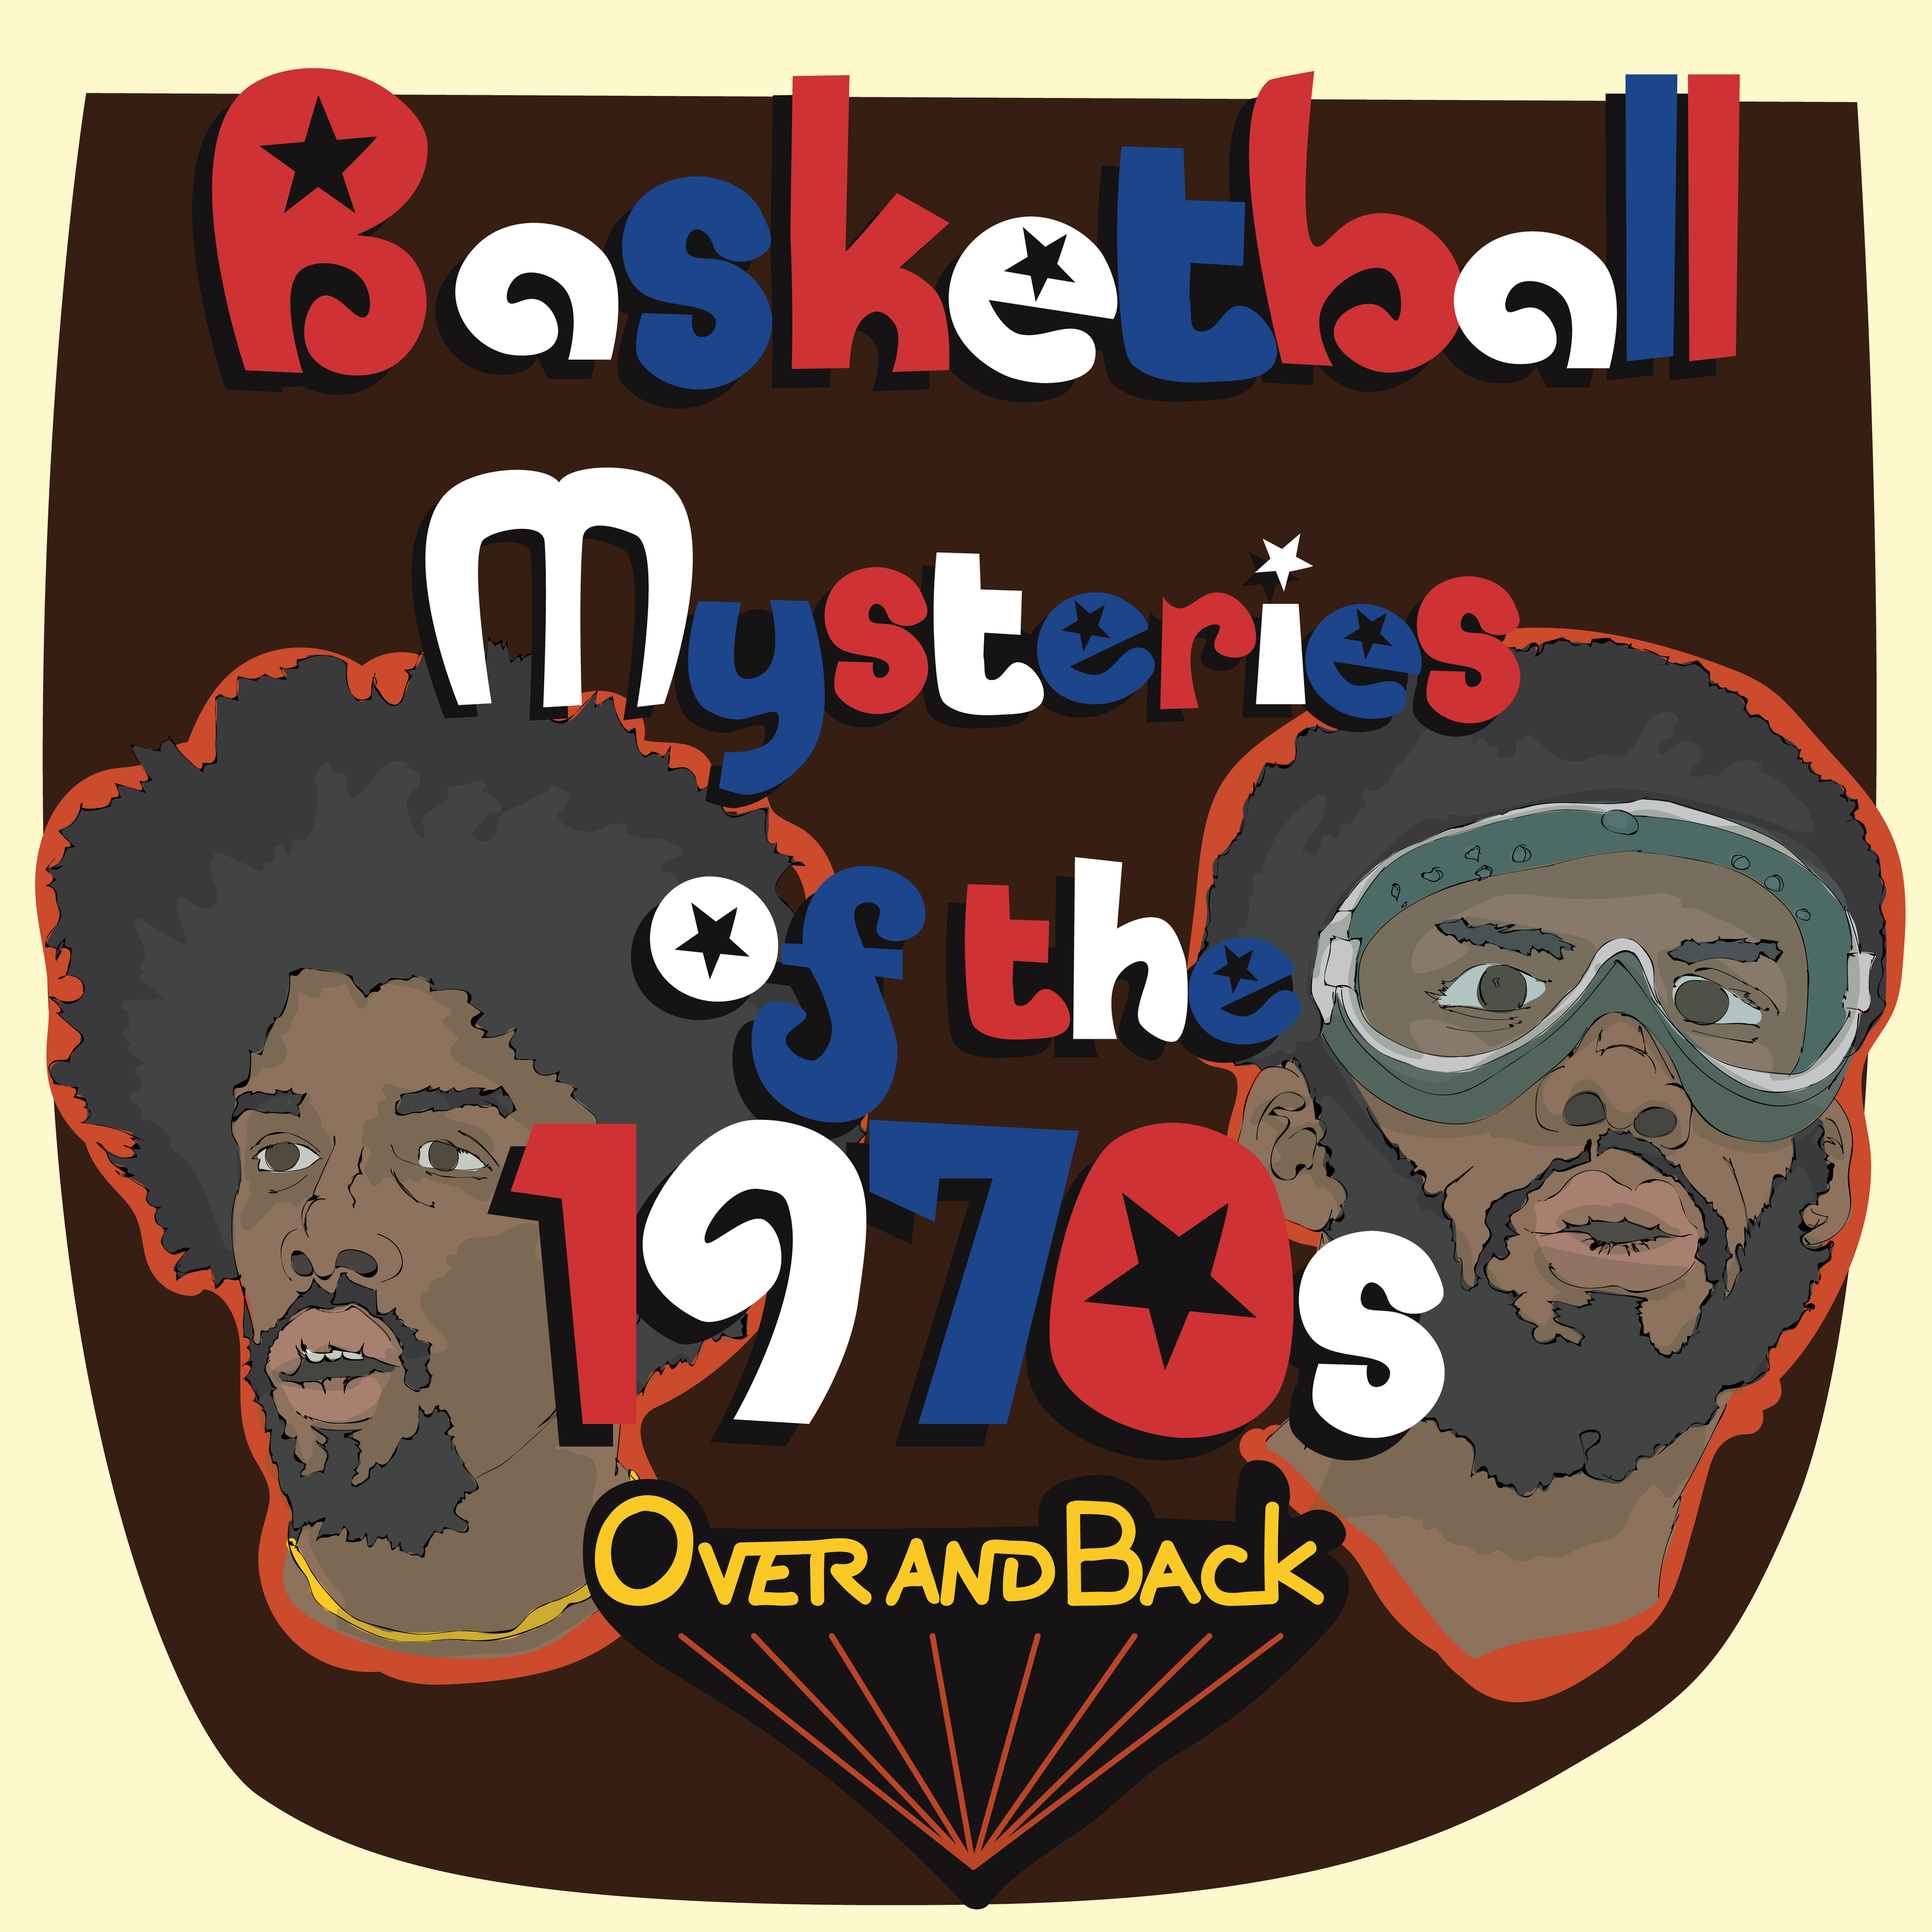 How great was Nate Thurmond’s quadruple-double? (Basketball Mysteries of the 1970s #2)